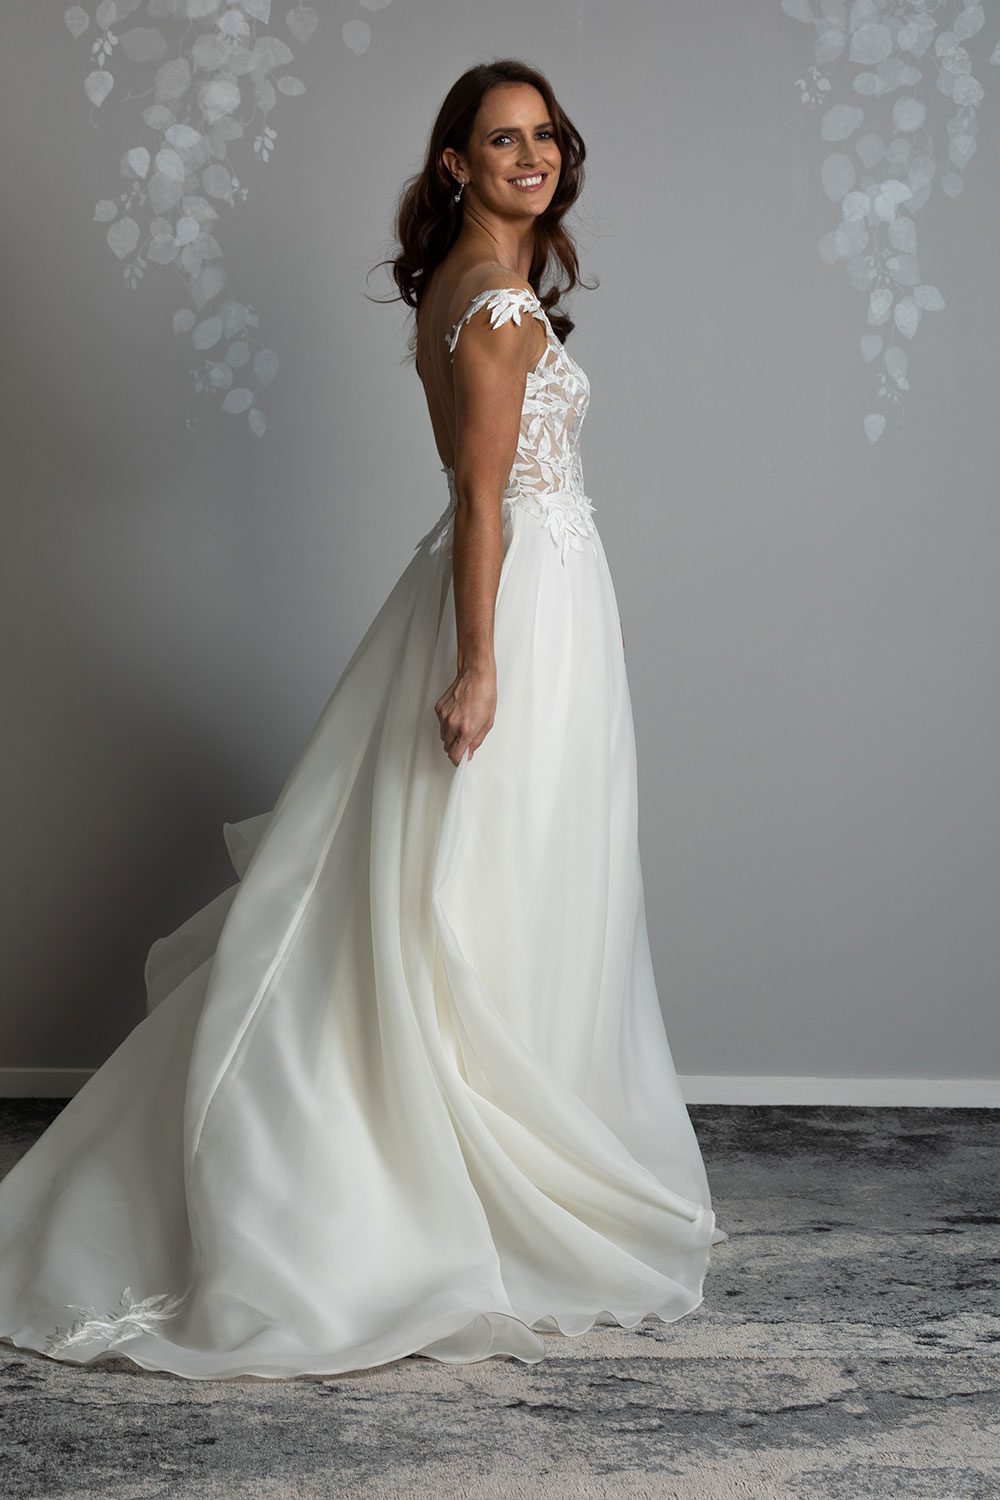 Ariana Wedding gown from Vinka Design - This gorgeous gown features delicate leaf lace hand-appliqued throughout the semi-sheer, structured bodice and up over the shoulder and skirt made of dreamy satin organza layers. Profile view showing translucent flowing organza skirt against low back and off shoulder ivy lace